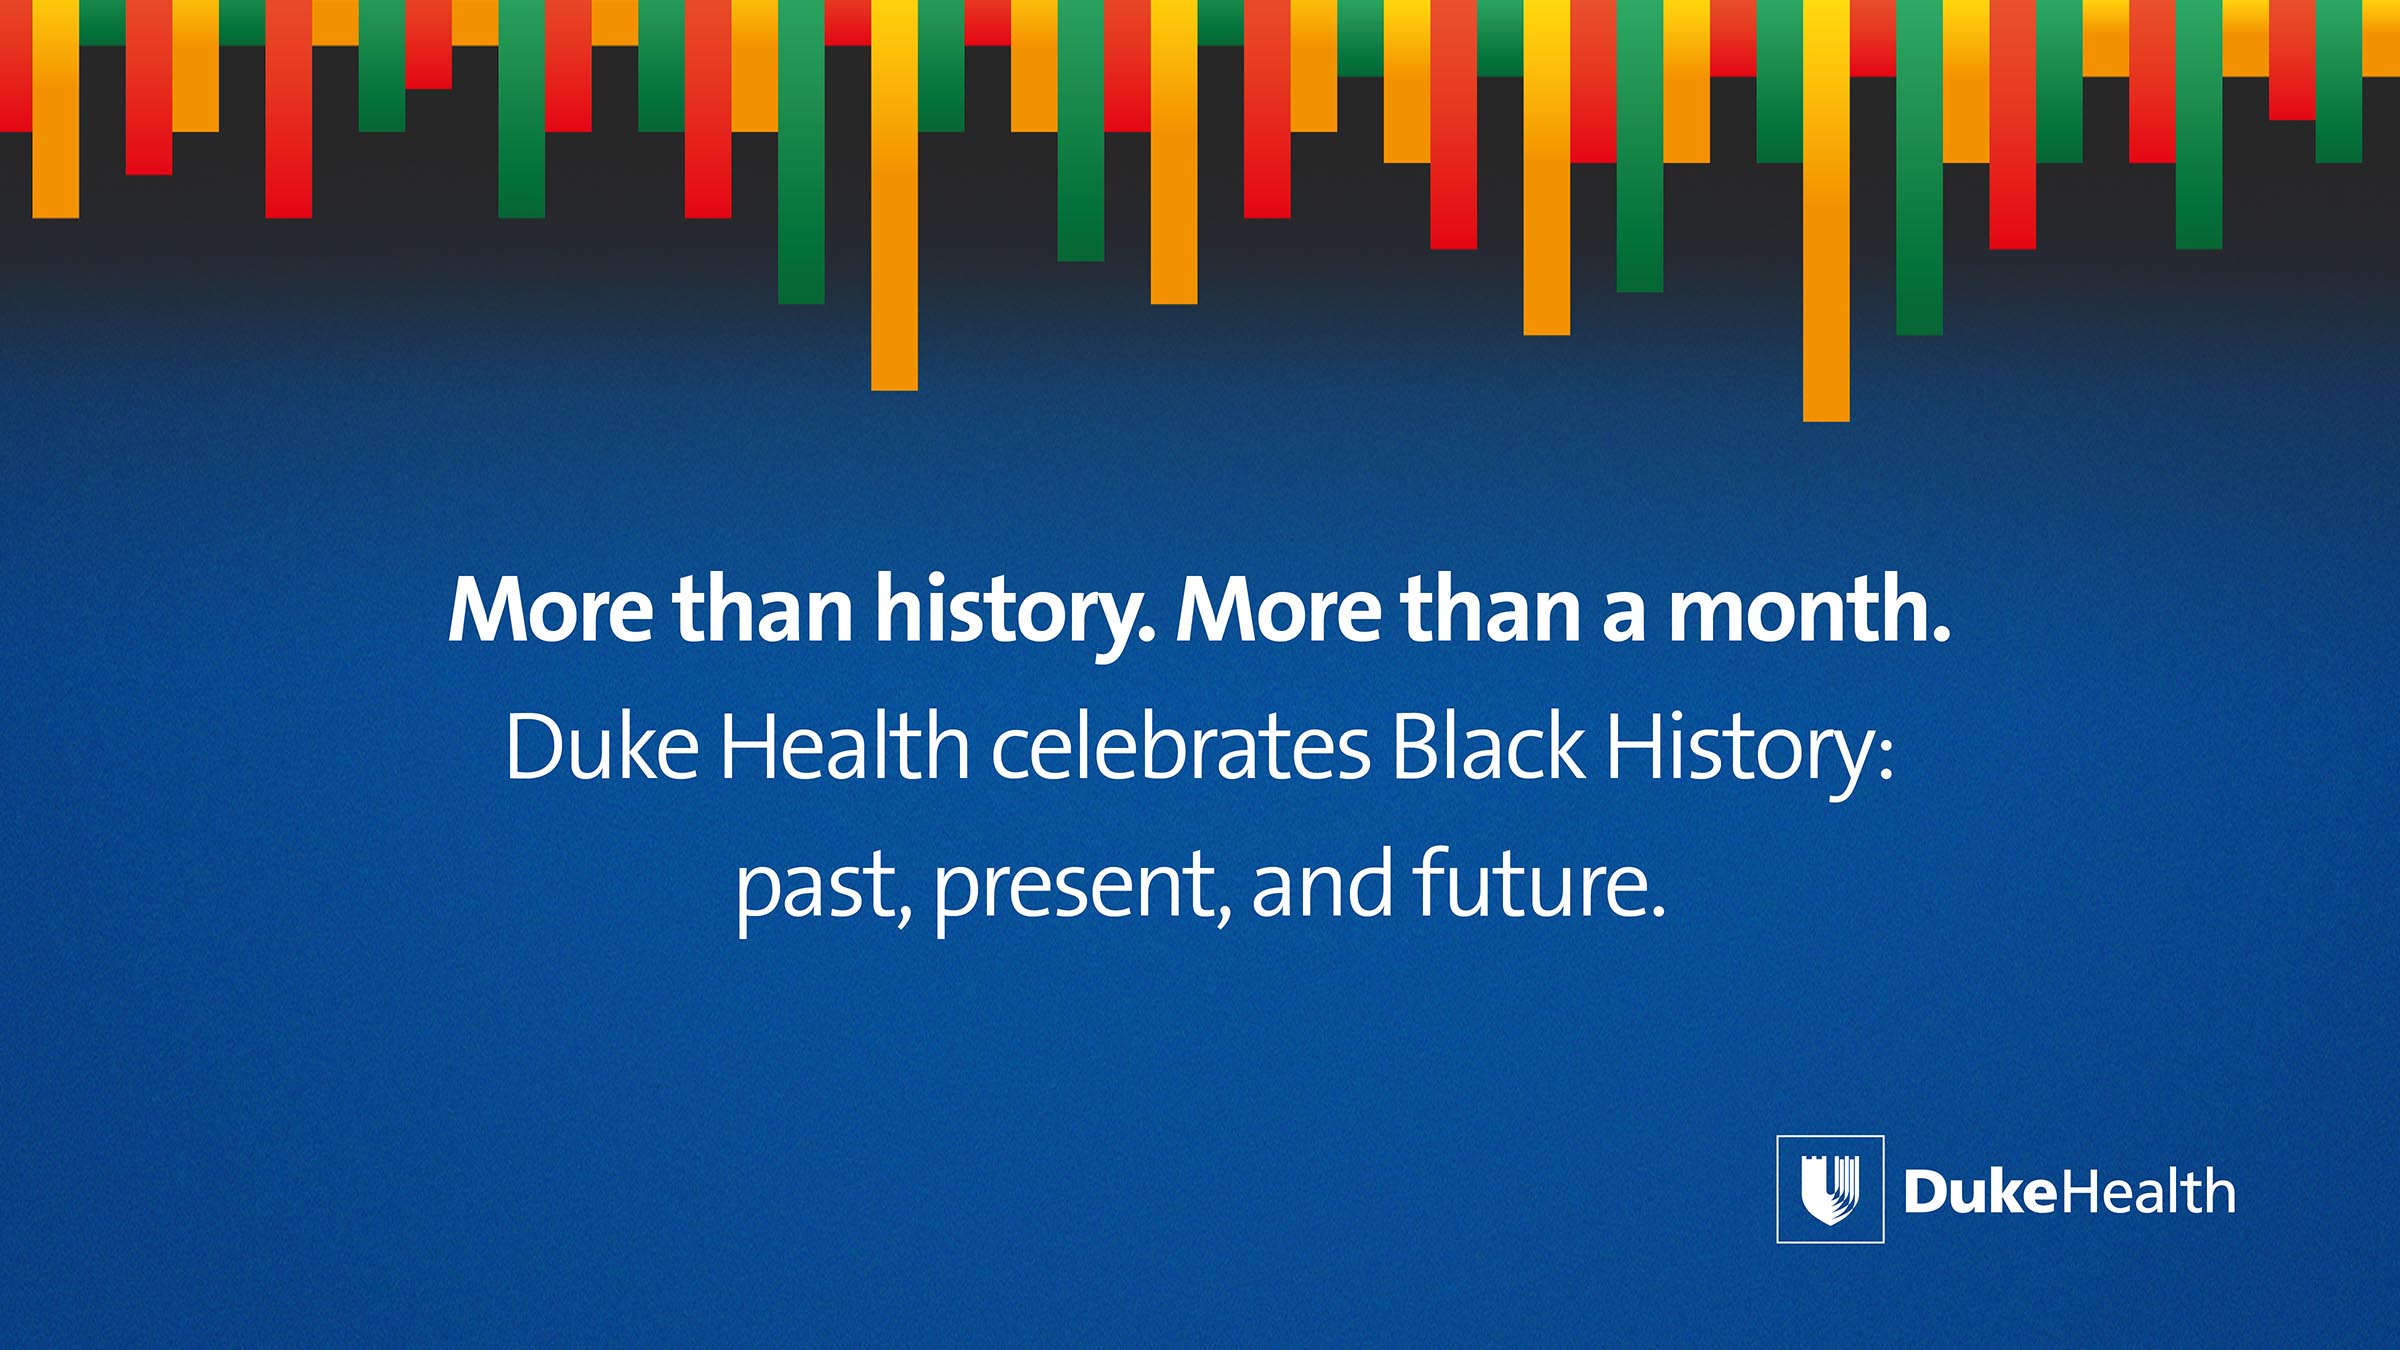 Black History Month celebrated by Duke Health